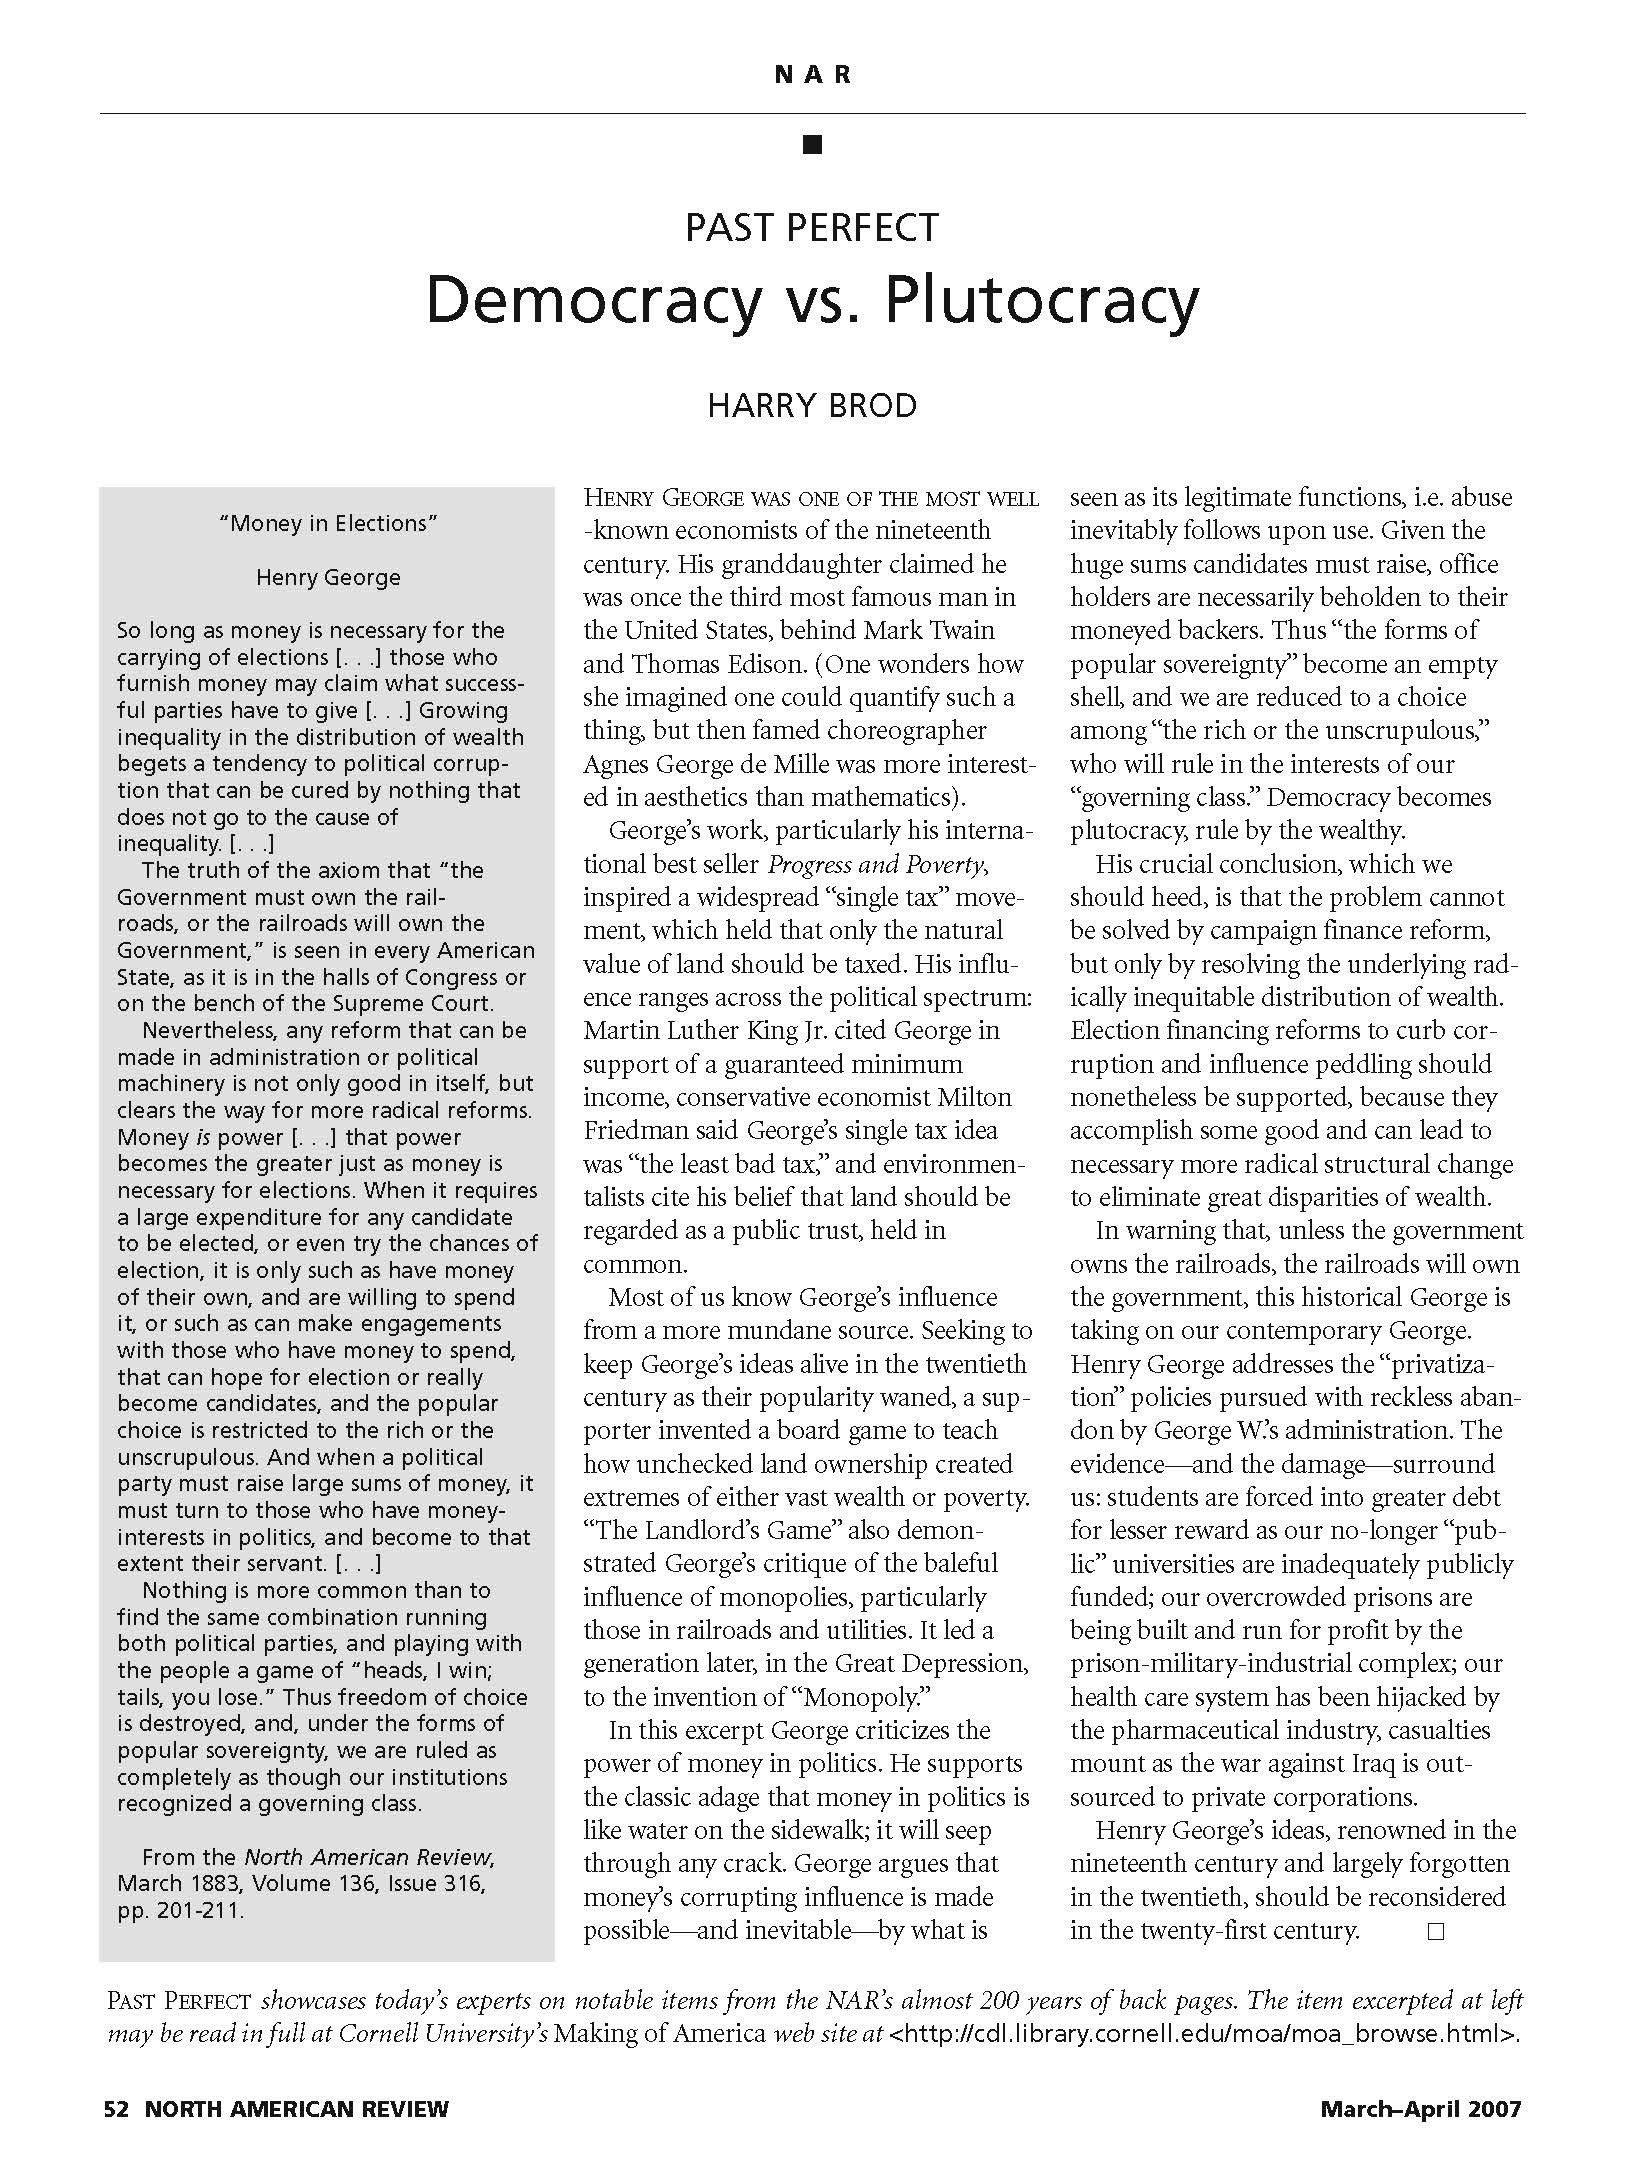 examples of plutocracy in history